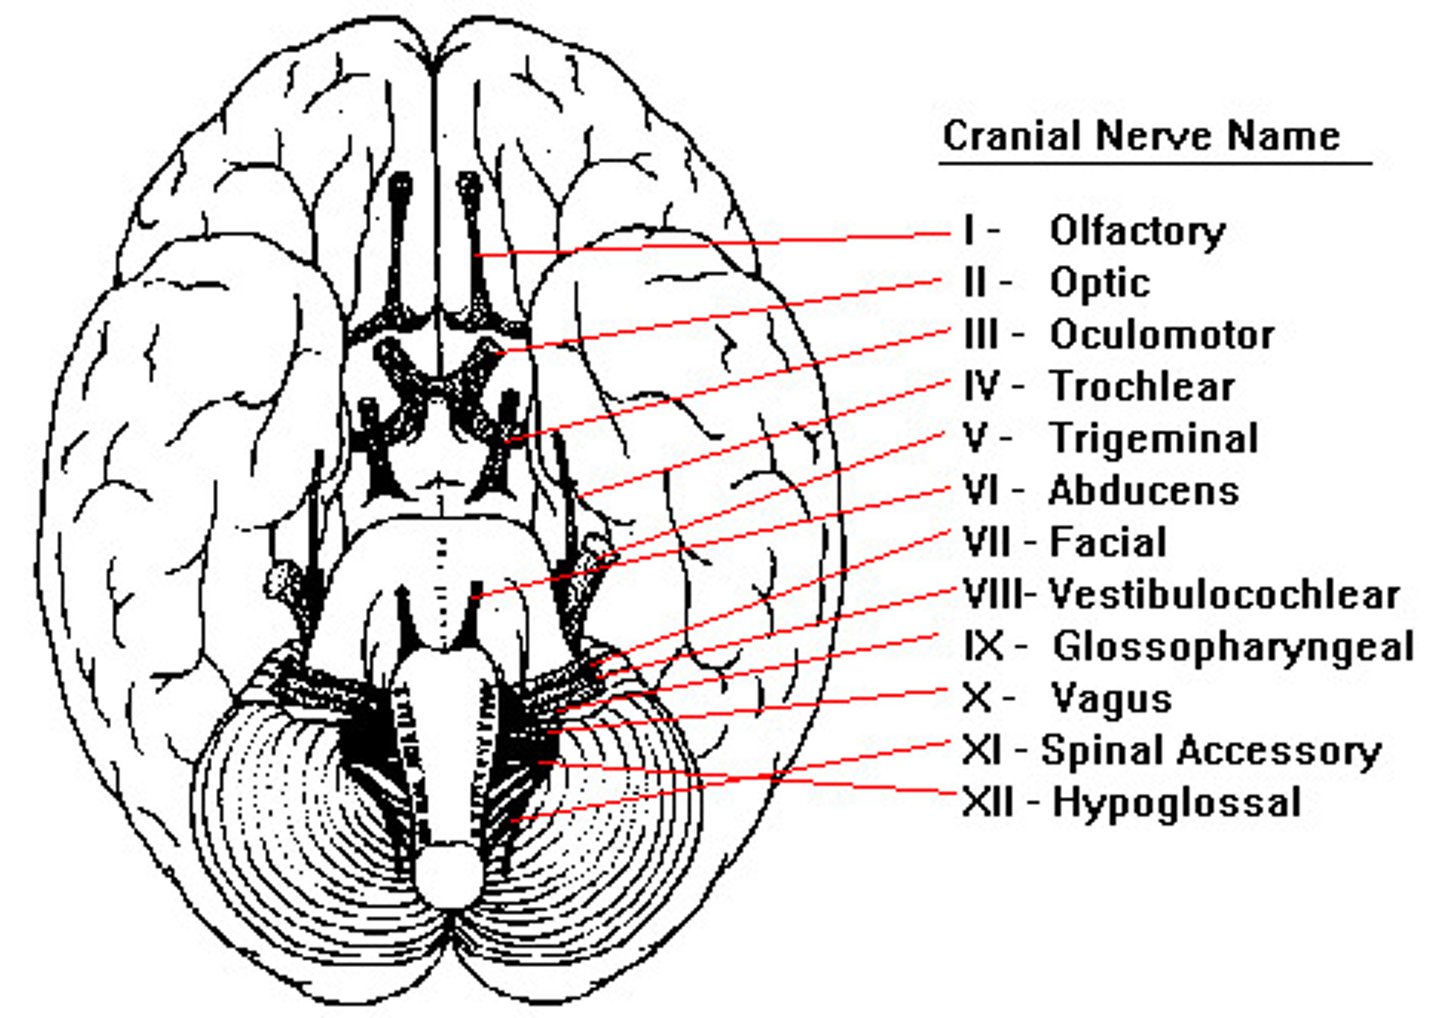 <p>12 cranial nerves (pair for left and right of body), control sensory and motor (connect to brain or medulla) without spinal cord</p>